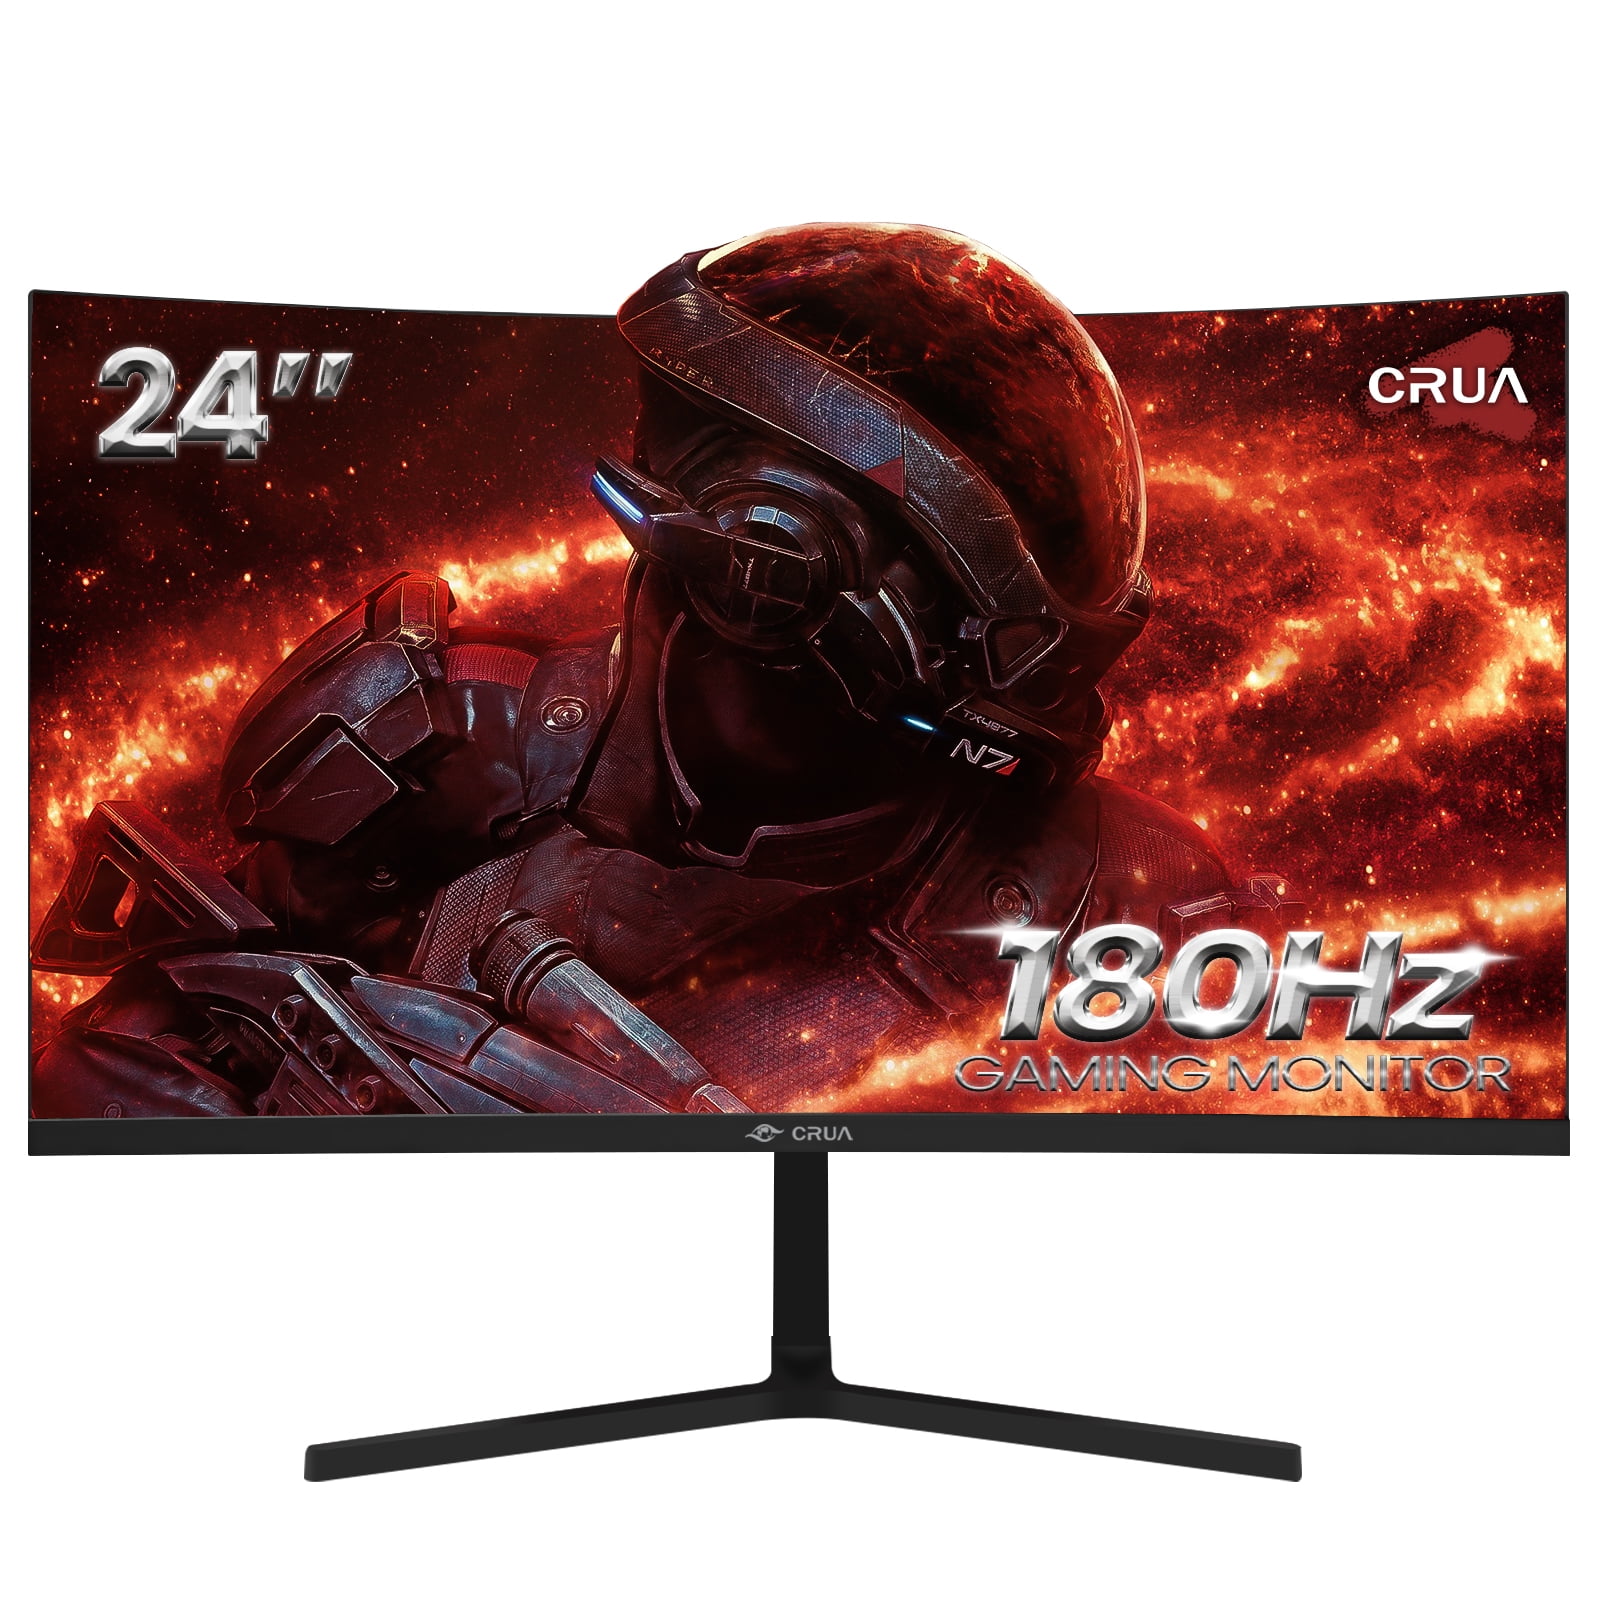 Crua 24 inch 165Hz/180Hz Curved Gaming Monitor - FHD 1080p Frameless Computer Monitor, AMD FreeSync, Low Motion Blur,Dp&Hdmi Port, Black, Size: Screen